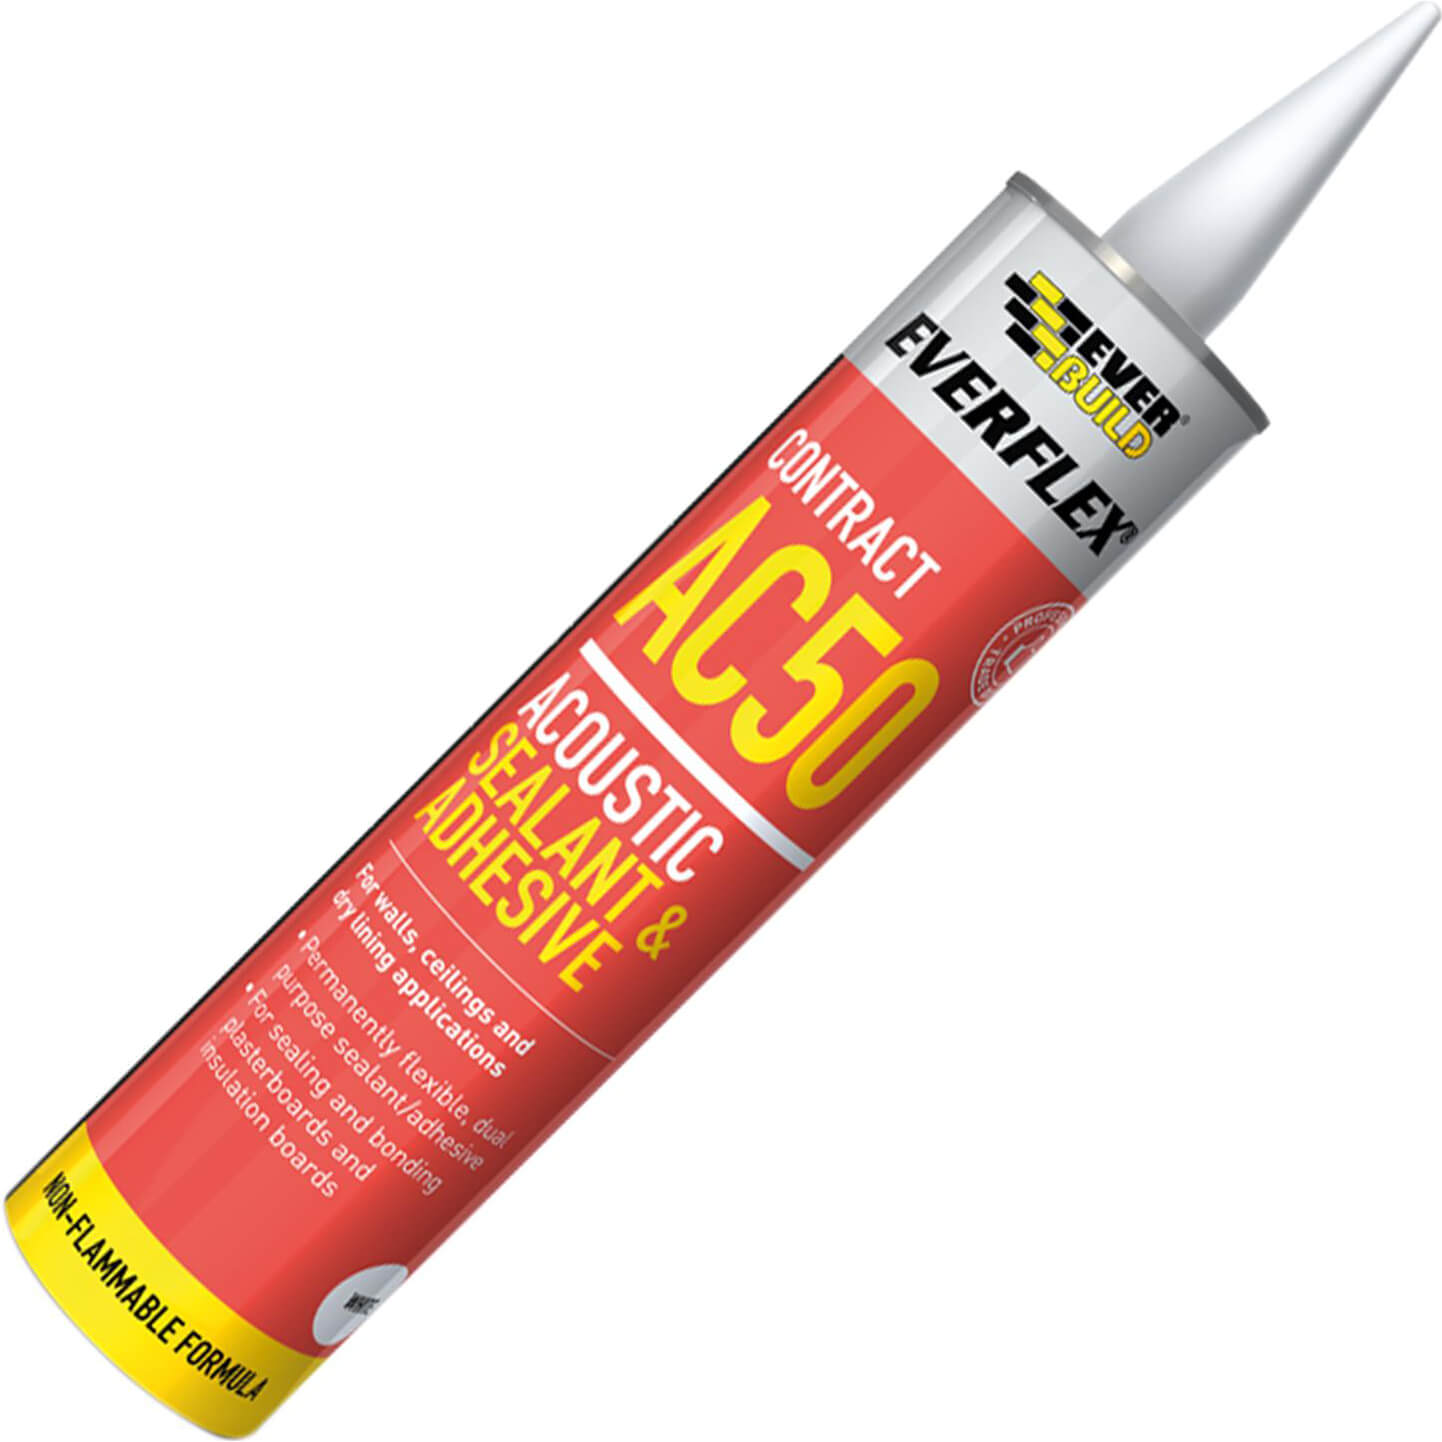 Image of Everbuild Acoustic Sealant and Adhesive 900ml